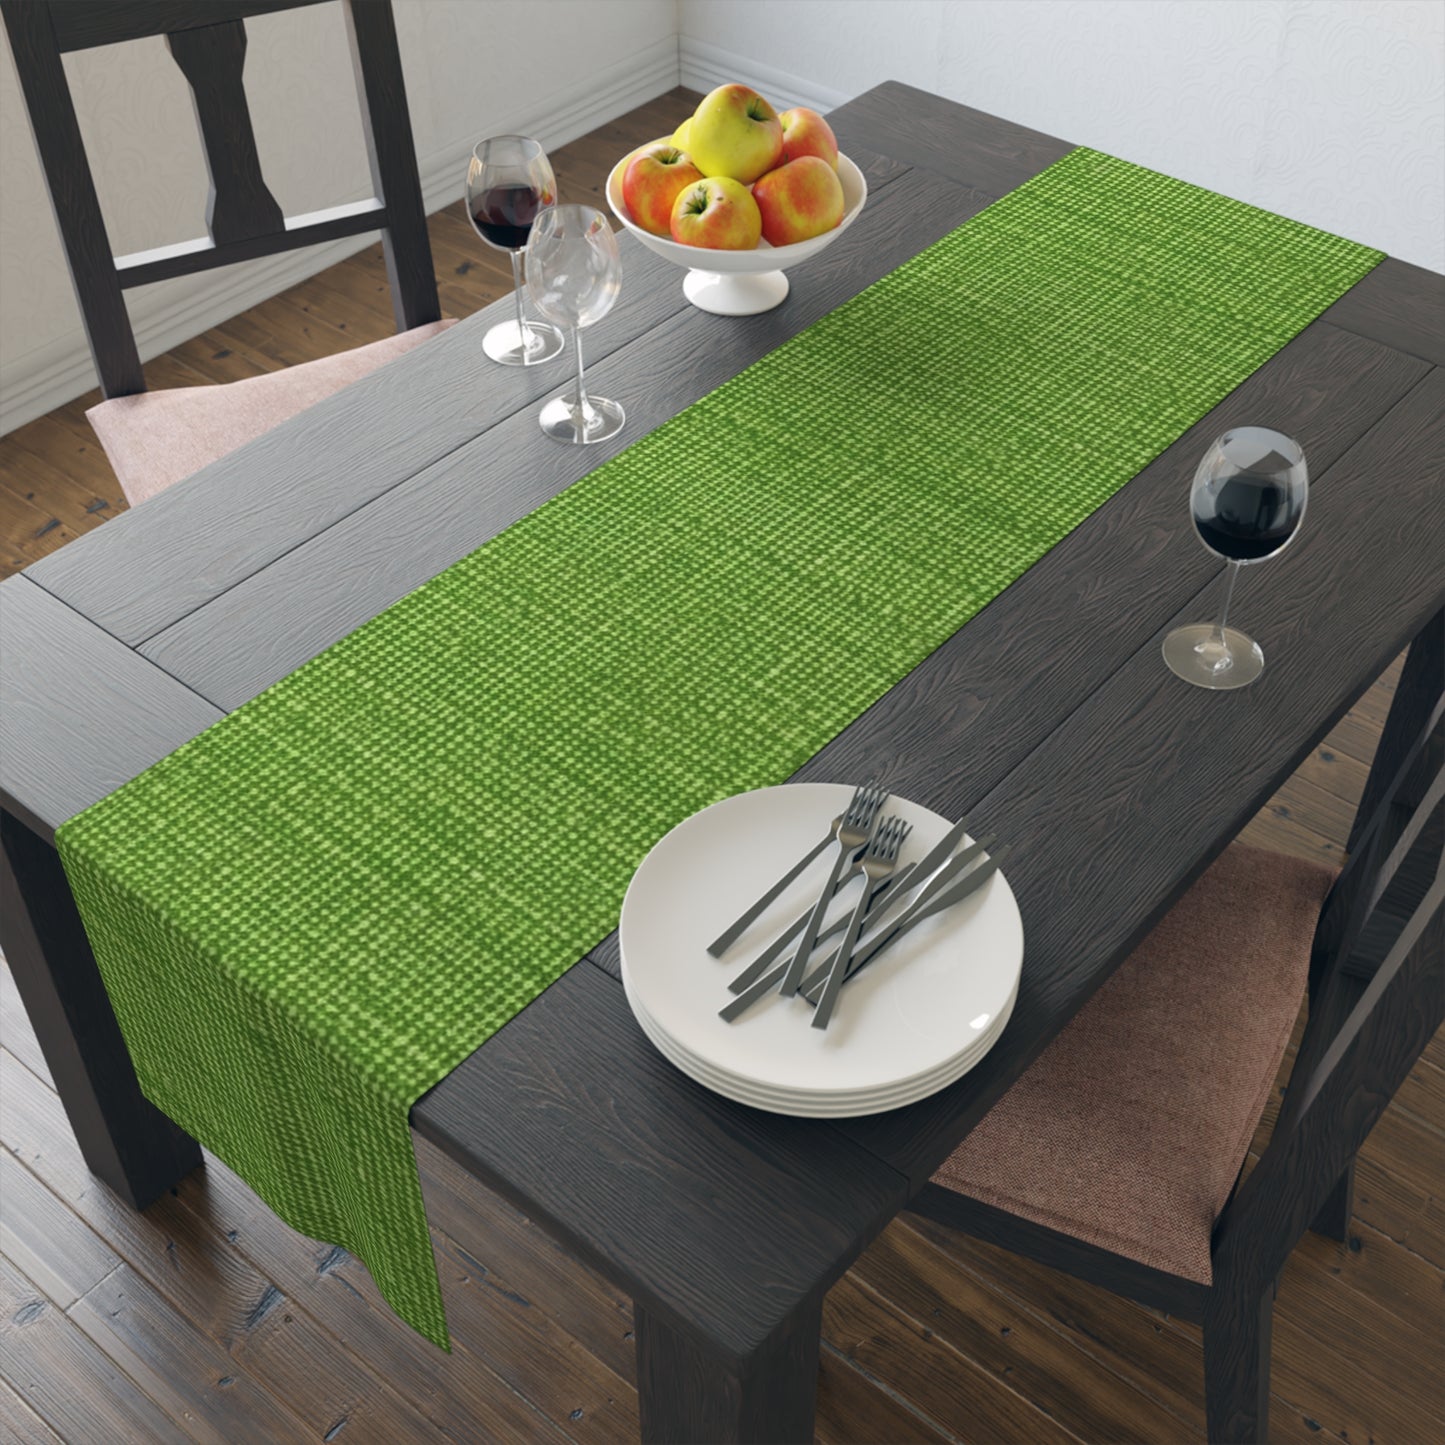 Olive Green Denim-Style: Seamless, Textured Fabric - Table Runner (Cotton, Poly)